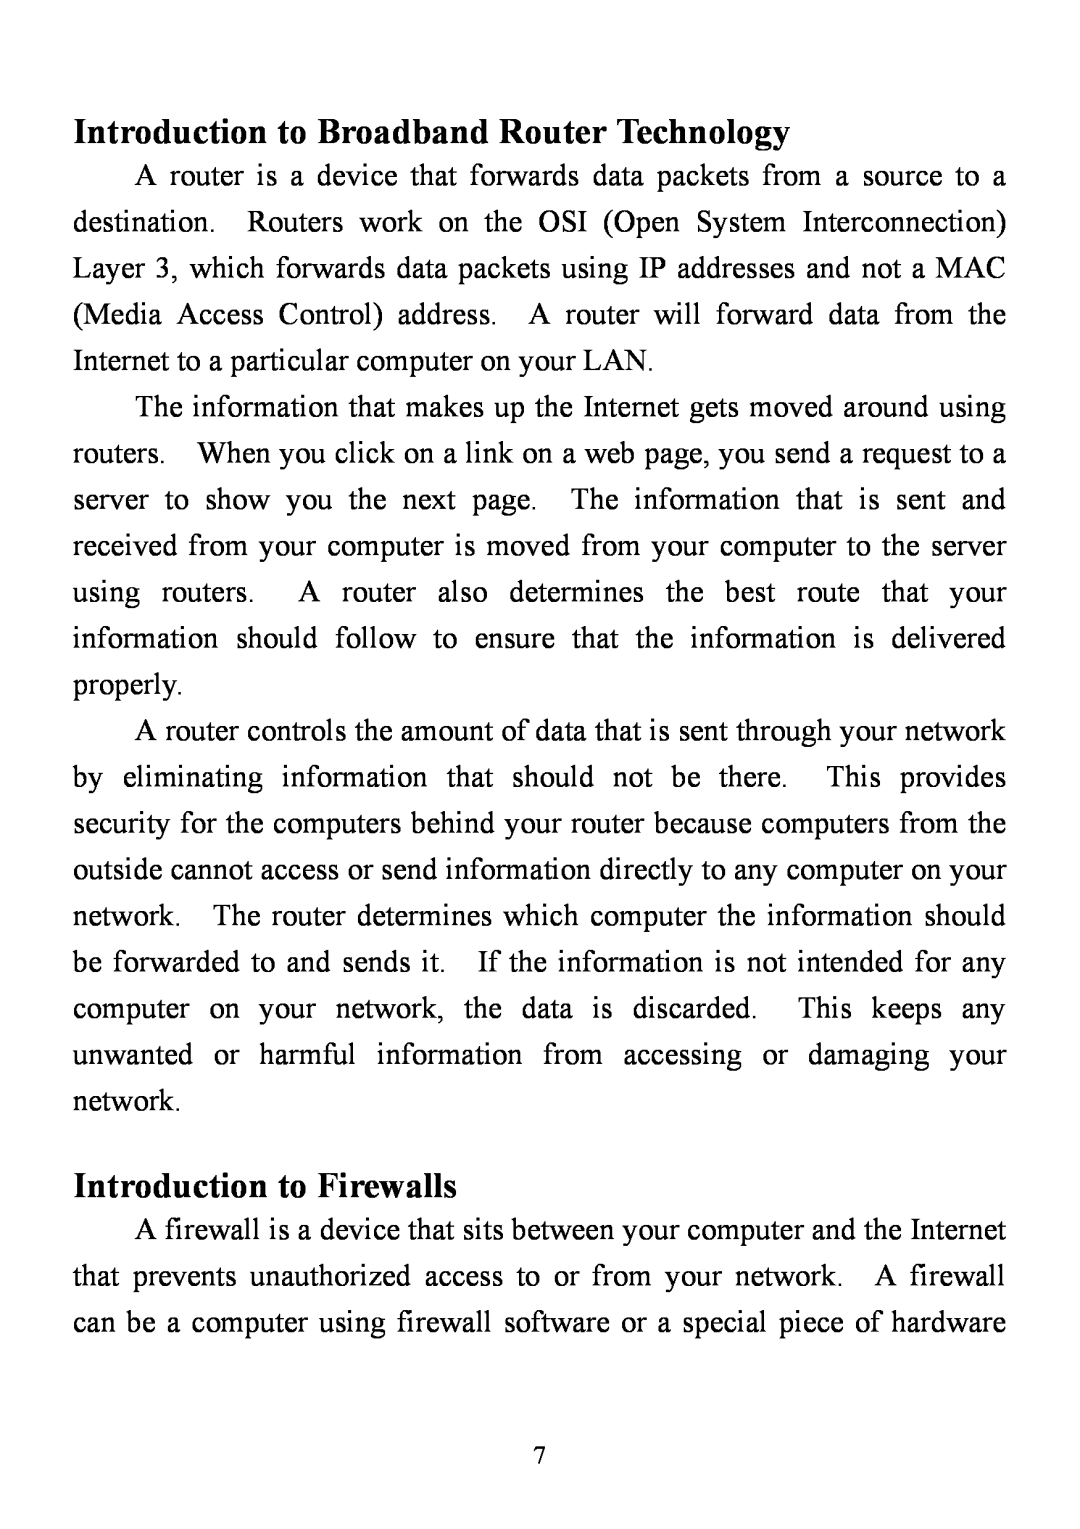 D-Link DI-714 user manual Introduction to Broadband Router Technology, Introduction to Firewalls 